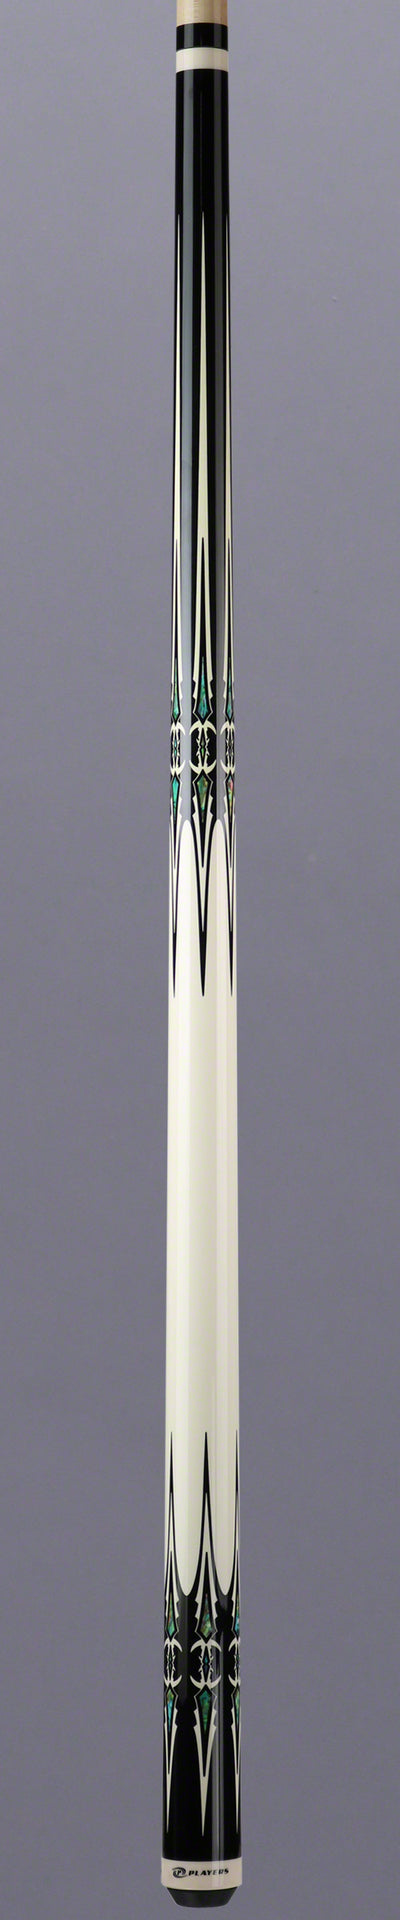 Players G-4112 Pool Cue